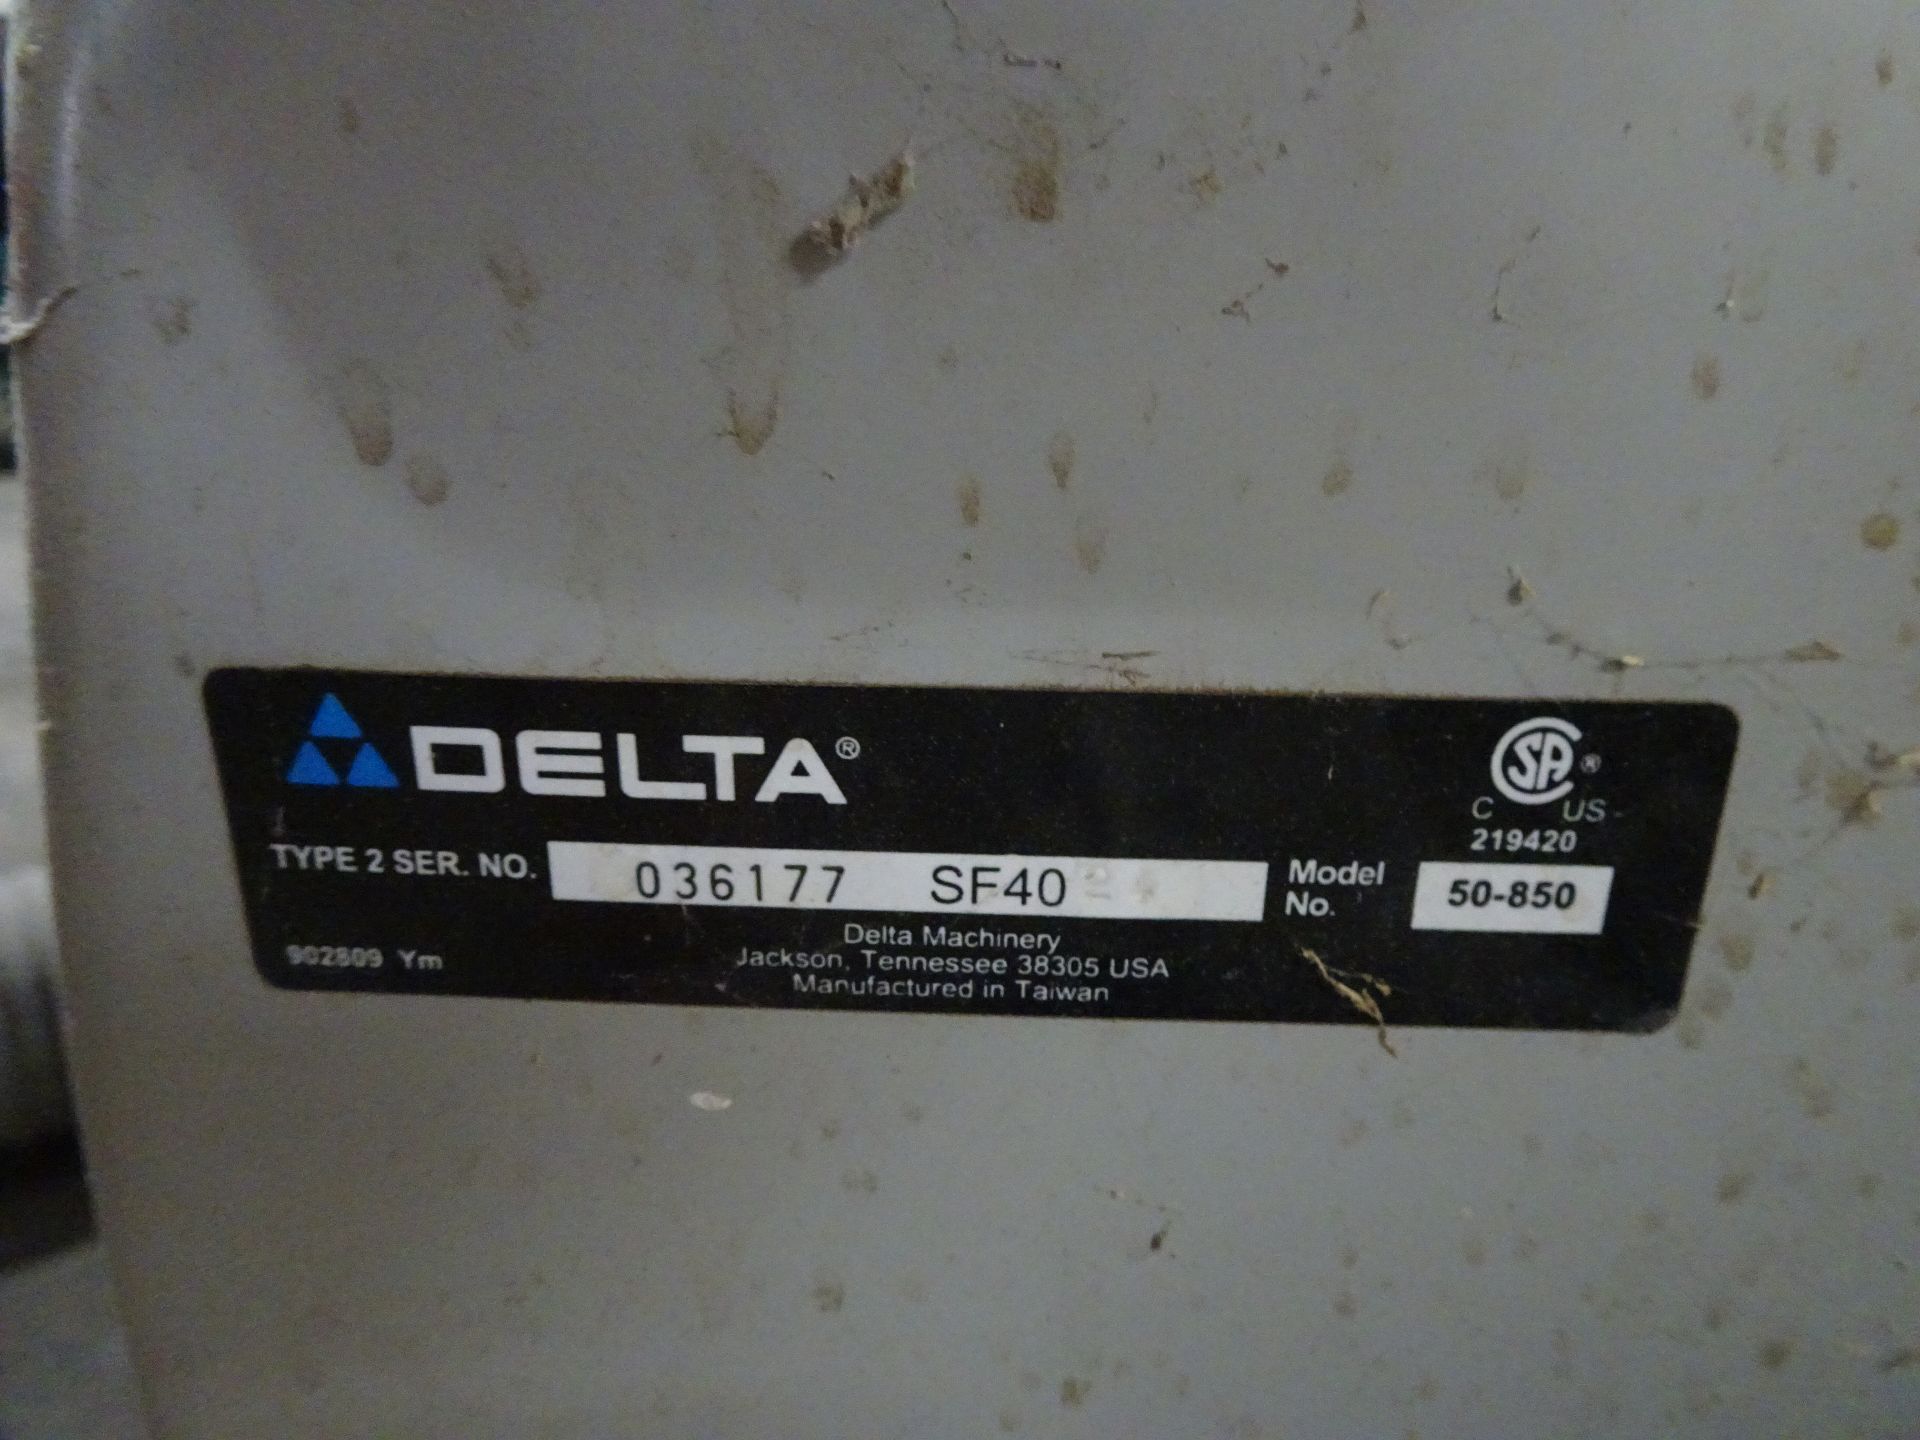 Delta Model 50-850 Portable Dust Collector, S/N 036177SF40, Location: FW Room - Image 2 of 2